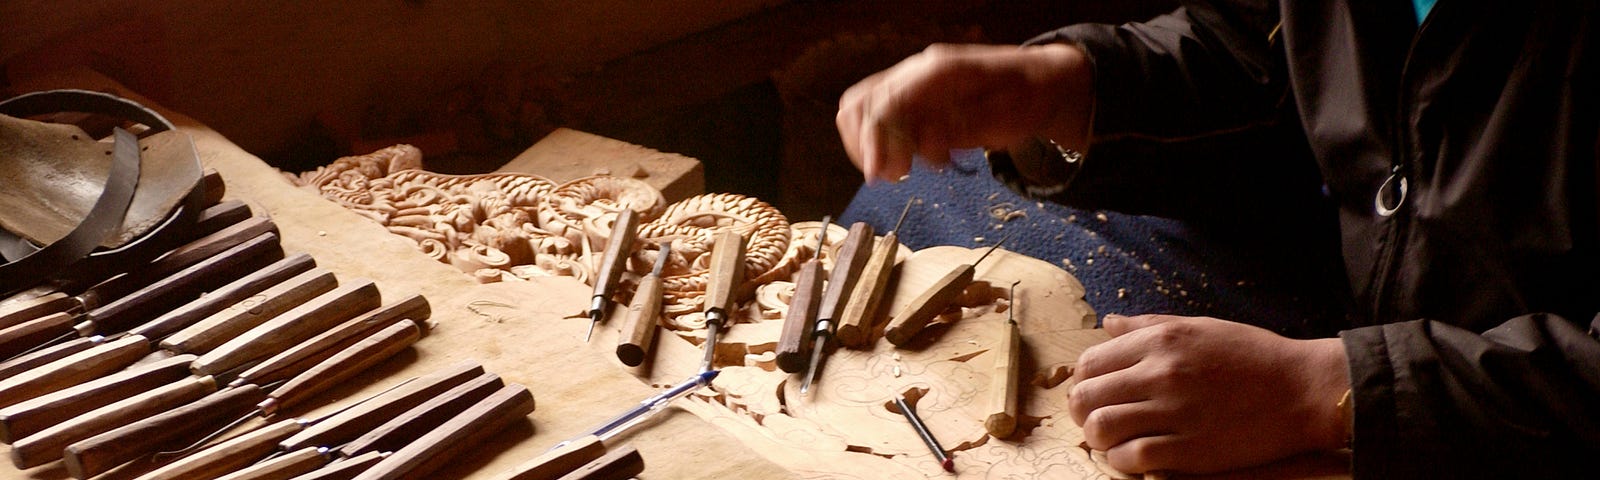 A woman working with different chisels.